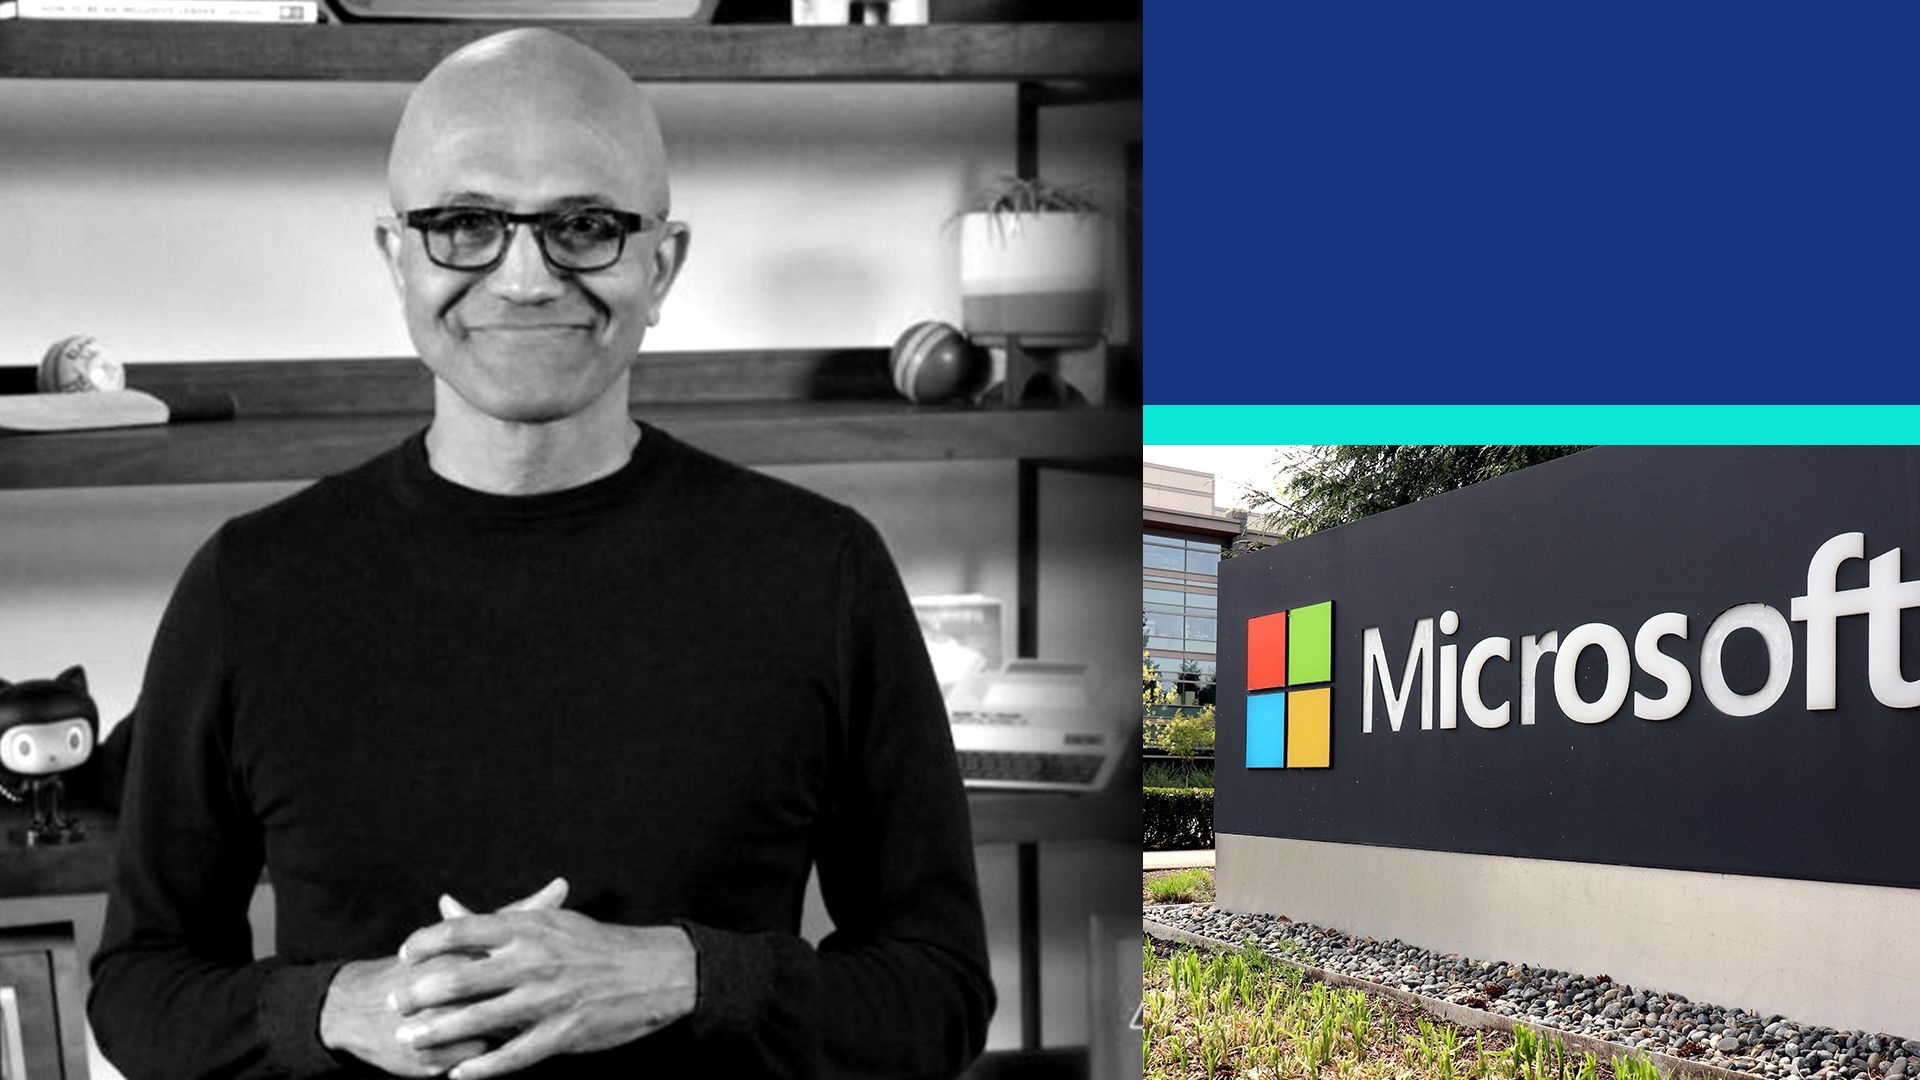 Illustration collage of Satya Nadella and the Microsoft logo on a sign